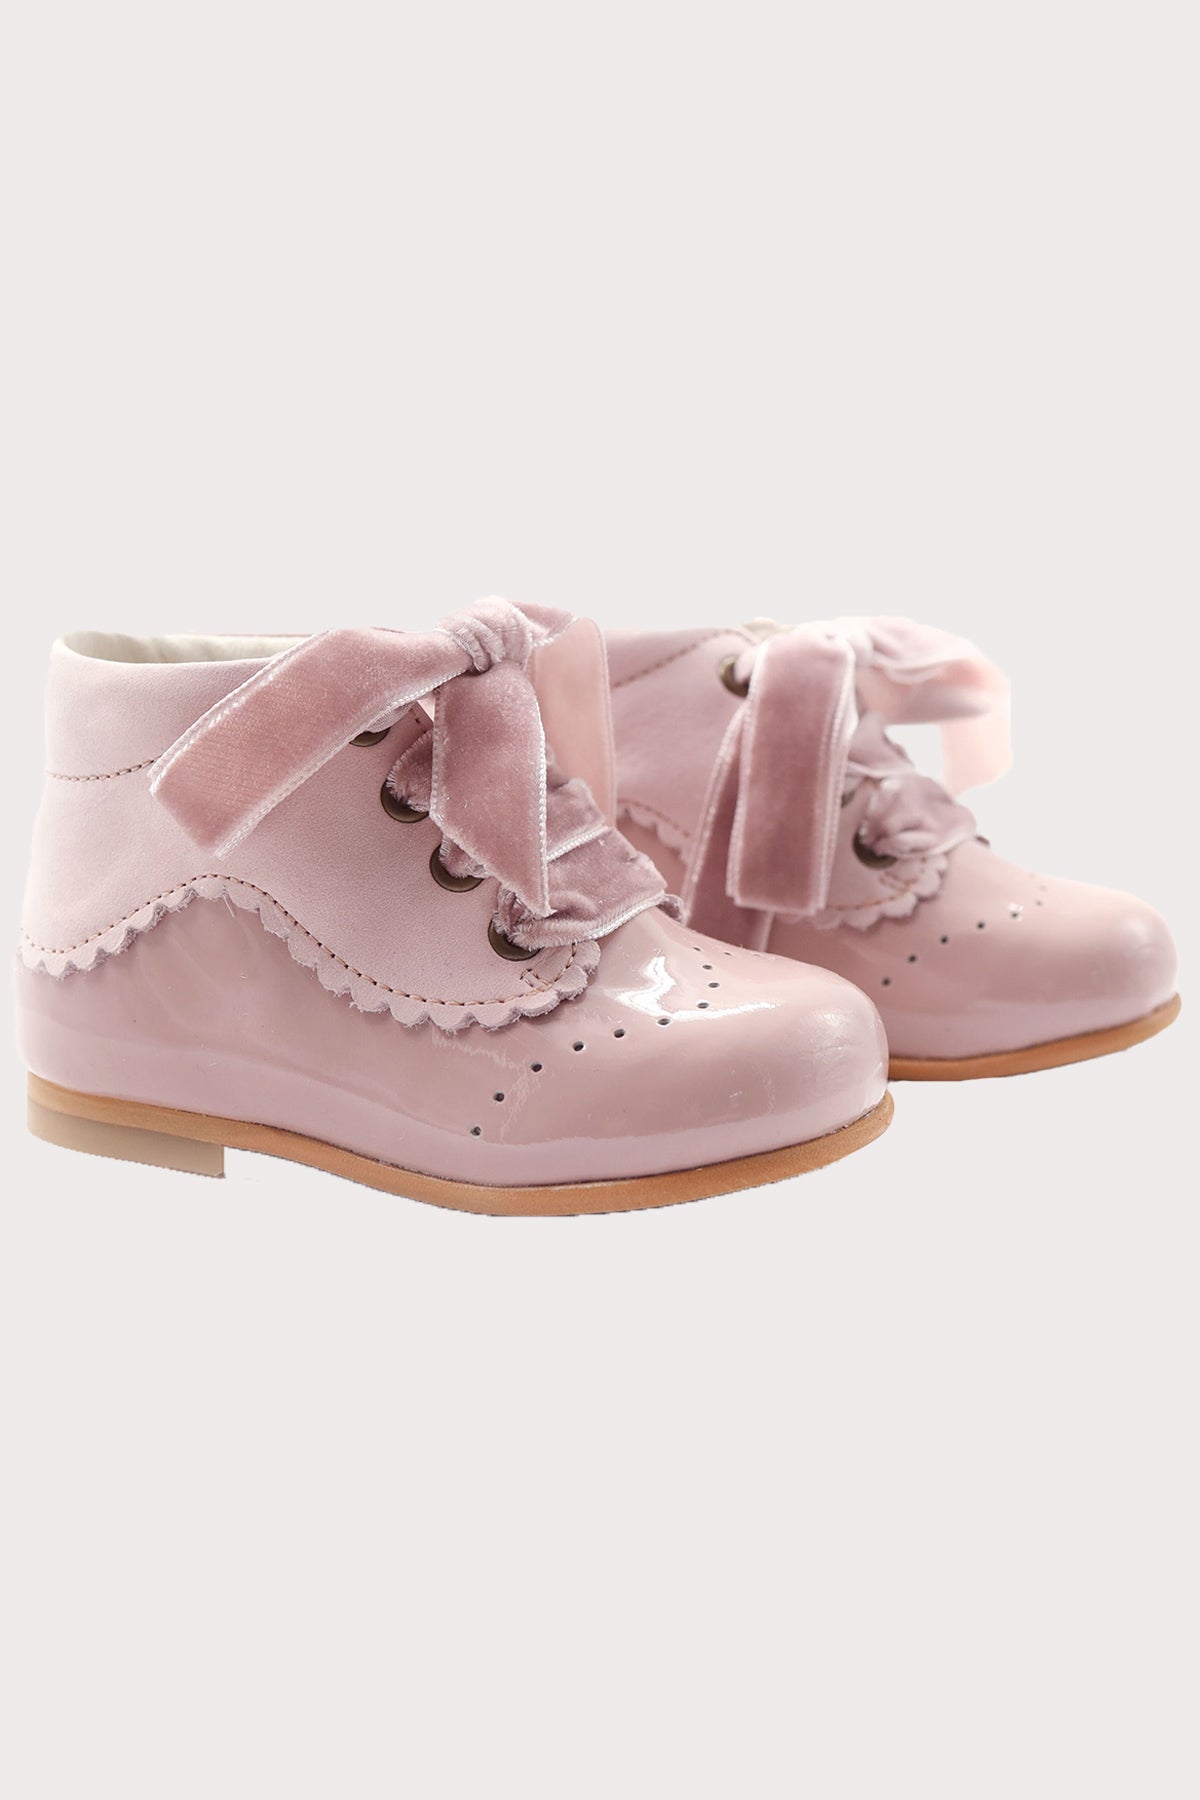 girls pink patent leather toddler boots